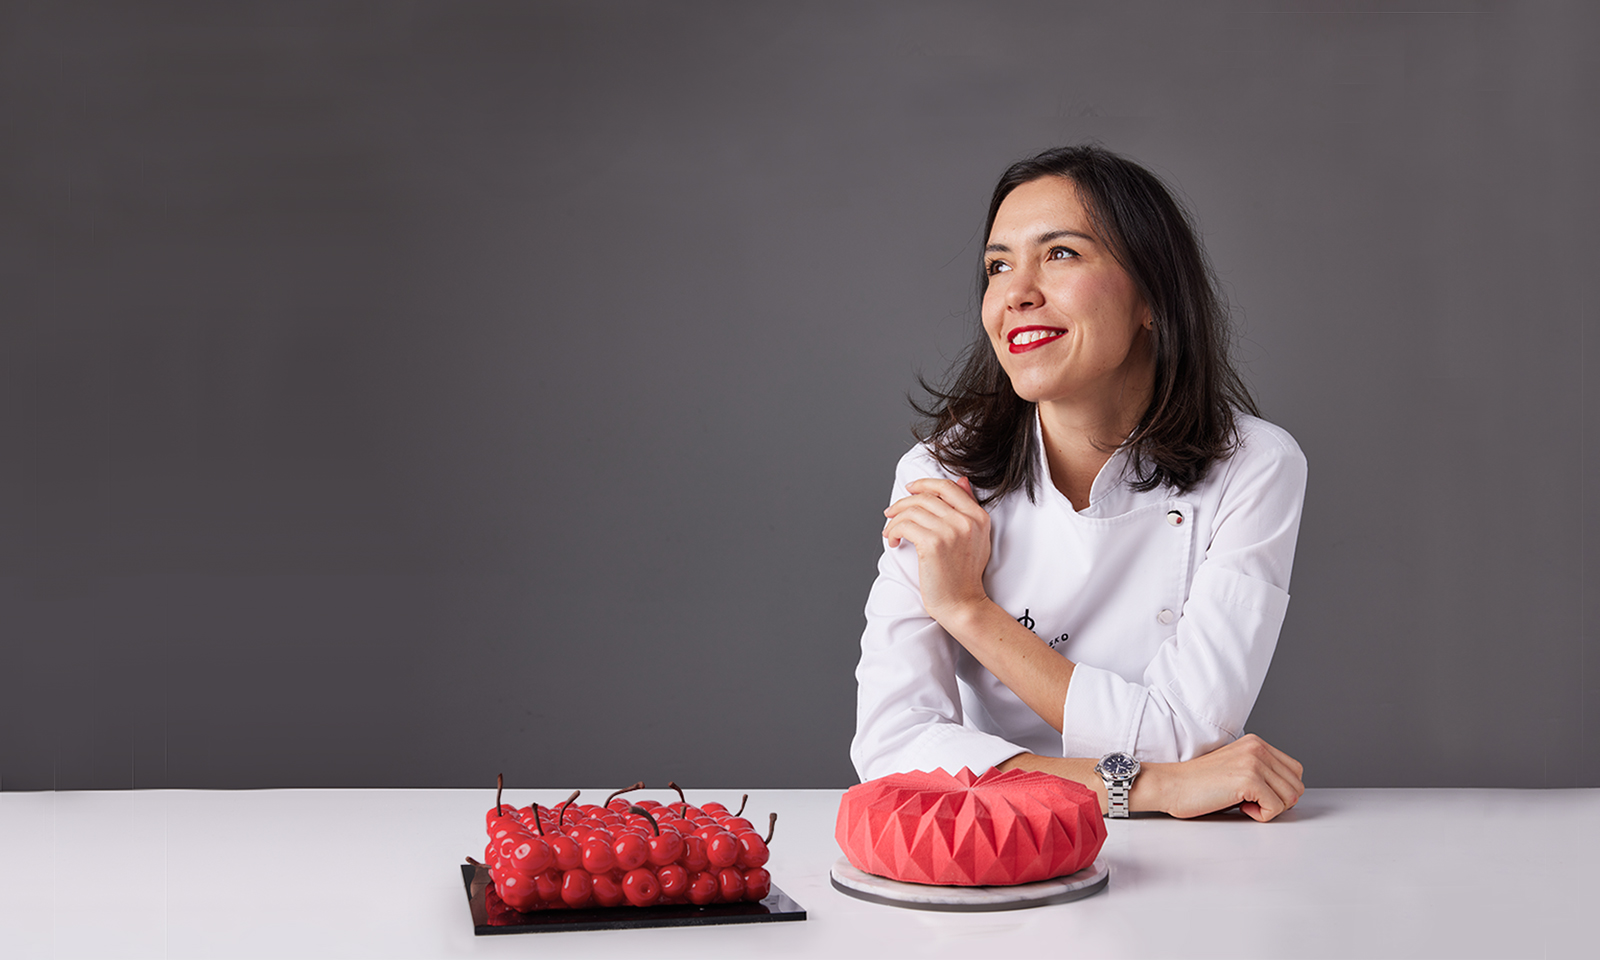 Architect-turned-pastry-chef makes her mark